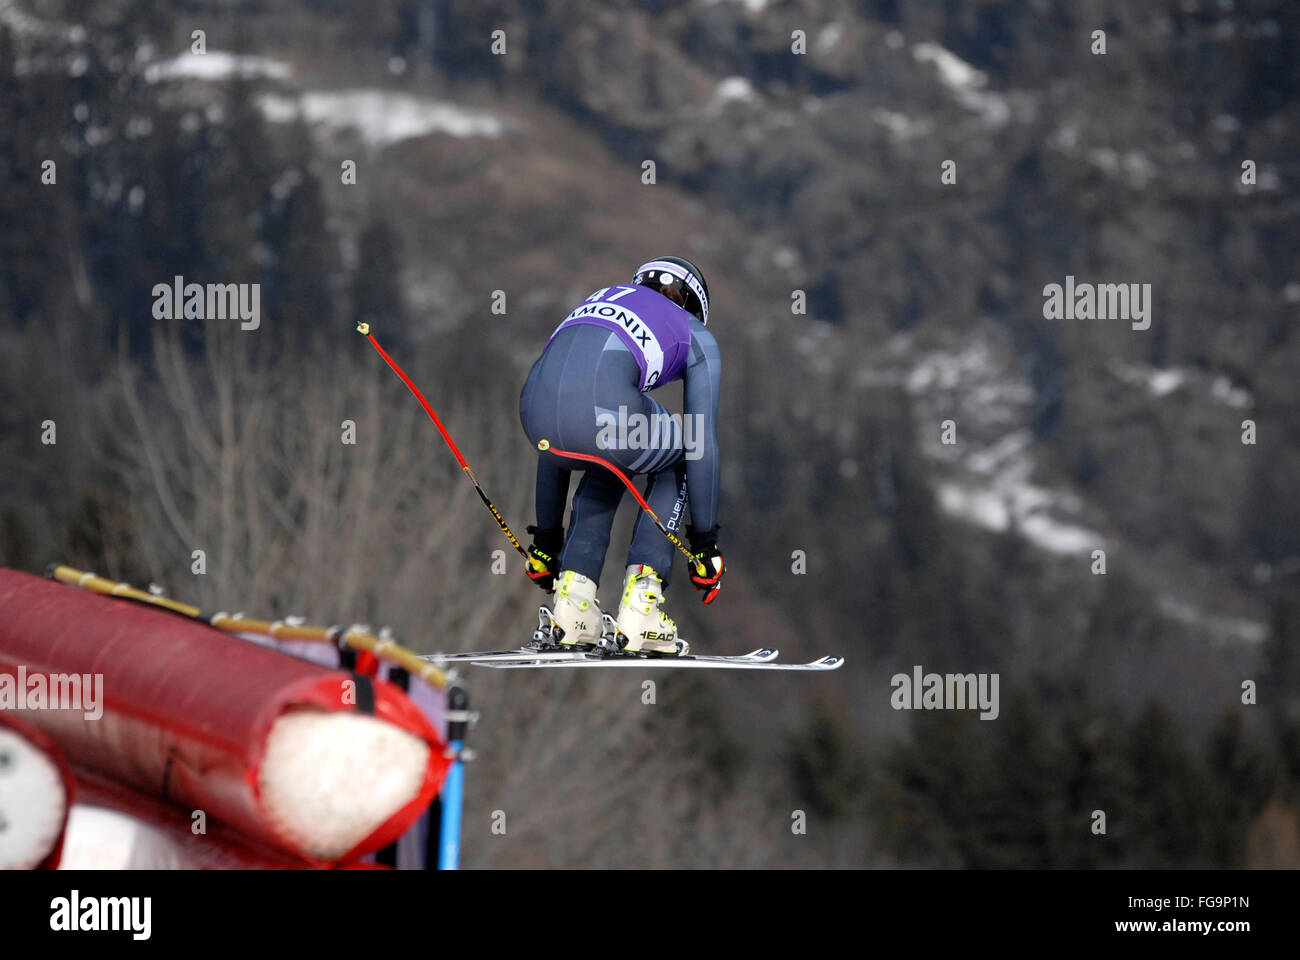 Mens downhill ski racer in the air Stock Photo